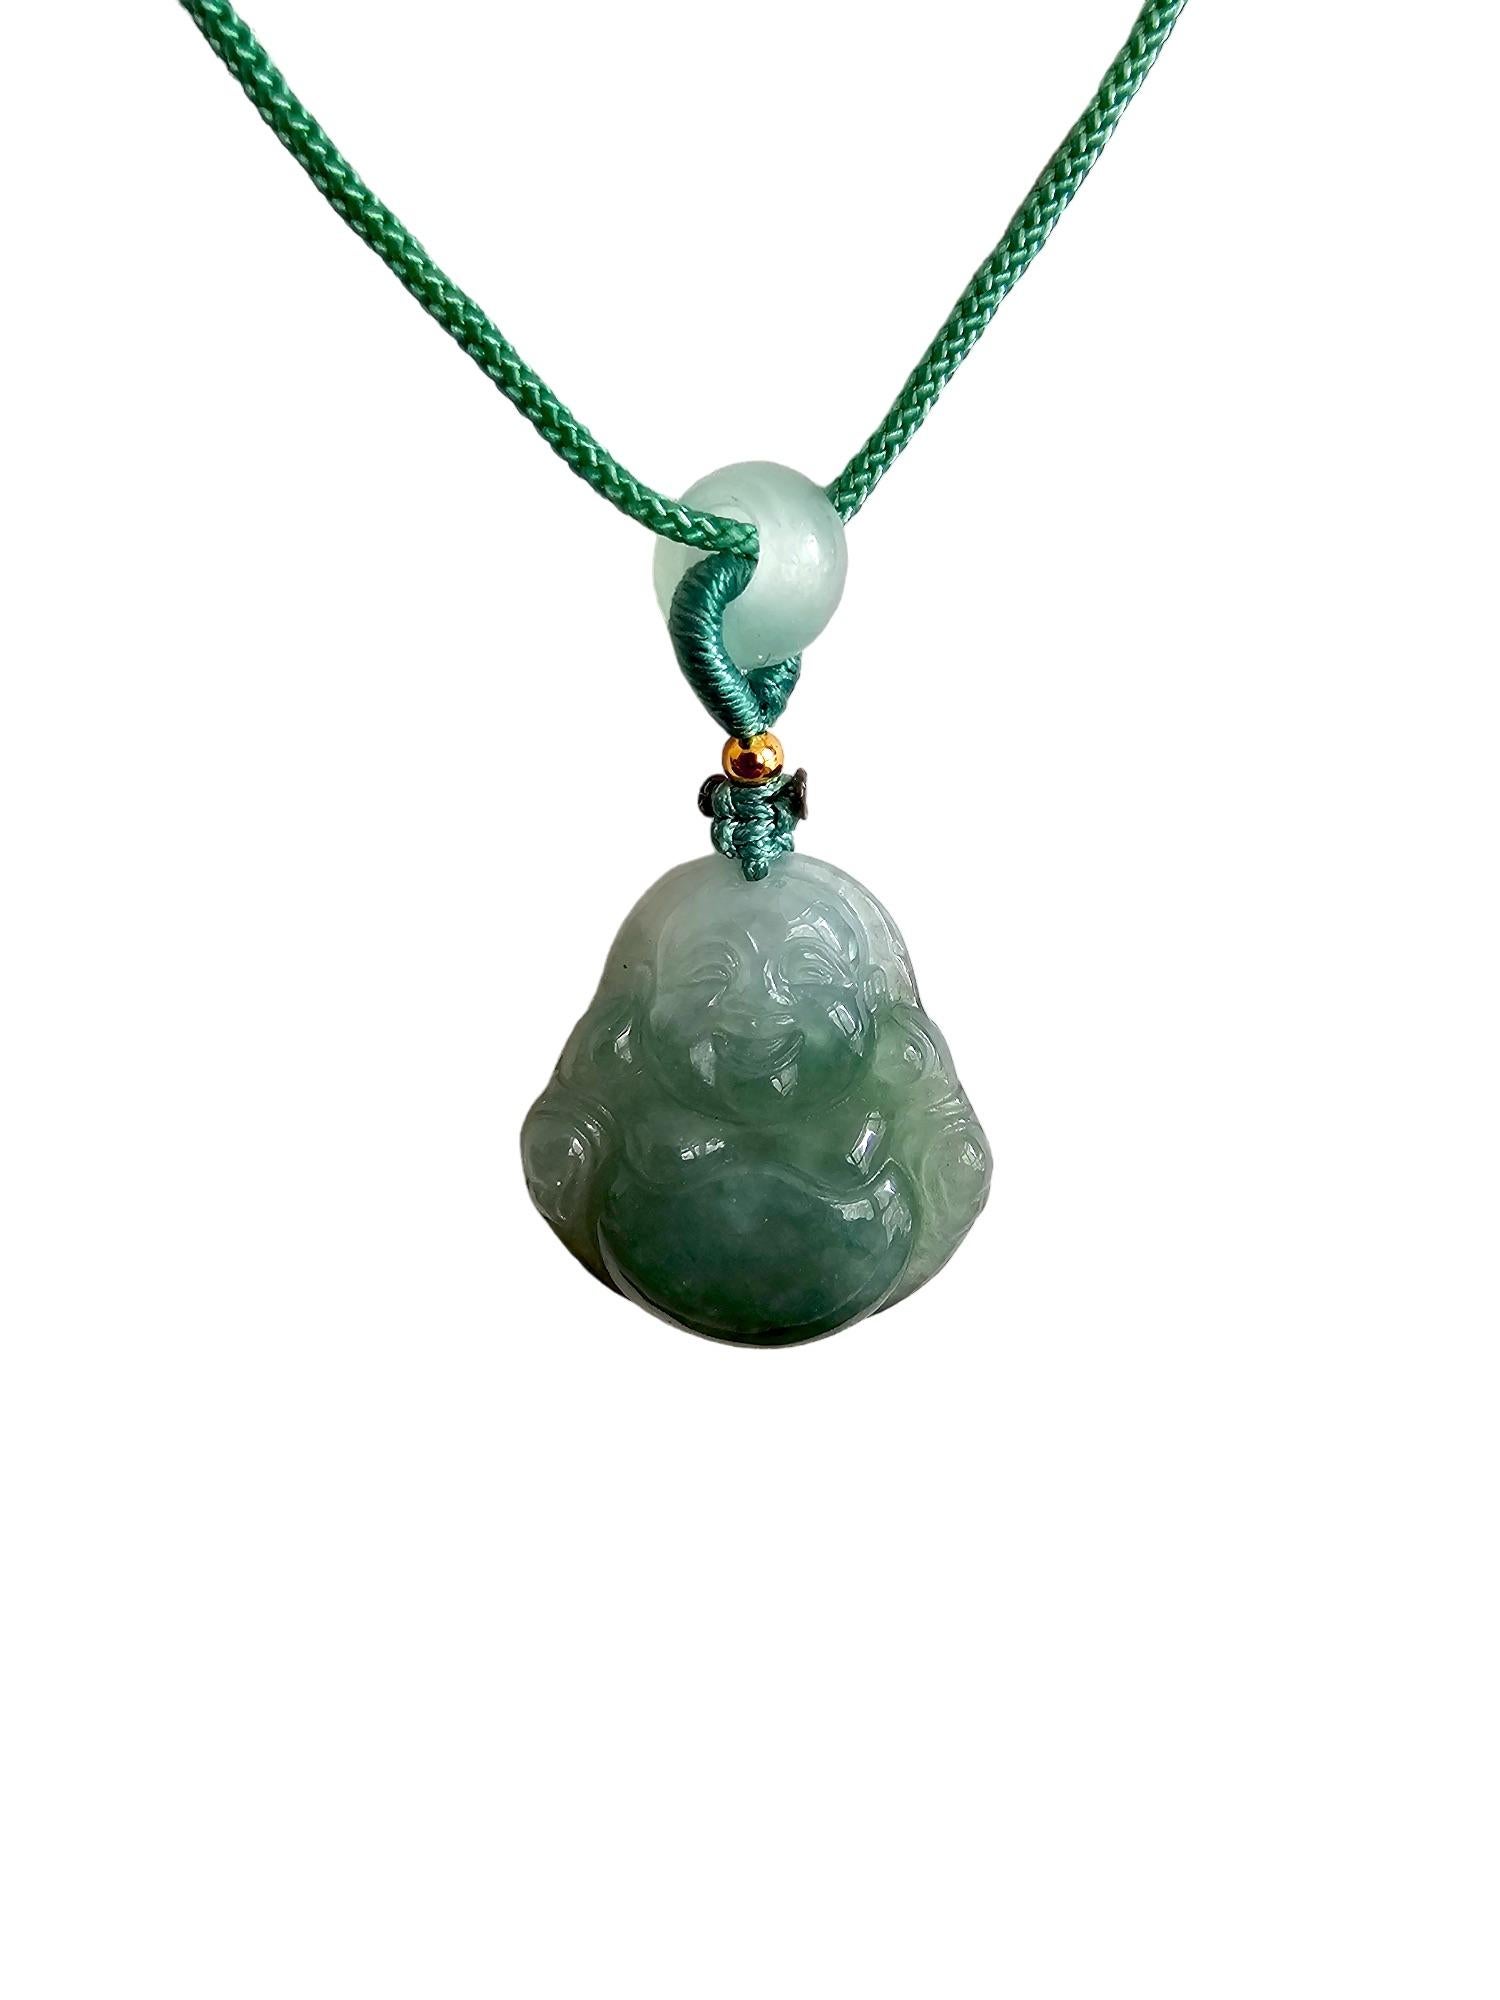 Sapporo Burmese Green A-Jadeite Laughing Buddha Pendant Necklace with FYORO String

Using Handpicked high translucency and carved natural Burmese A-Jadeite. We created a Laughing Buddha design with inspiration notes from Sapporo, Japan. We allow the